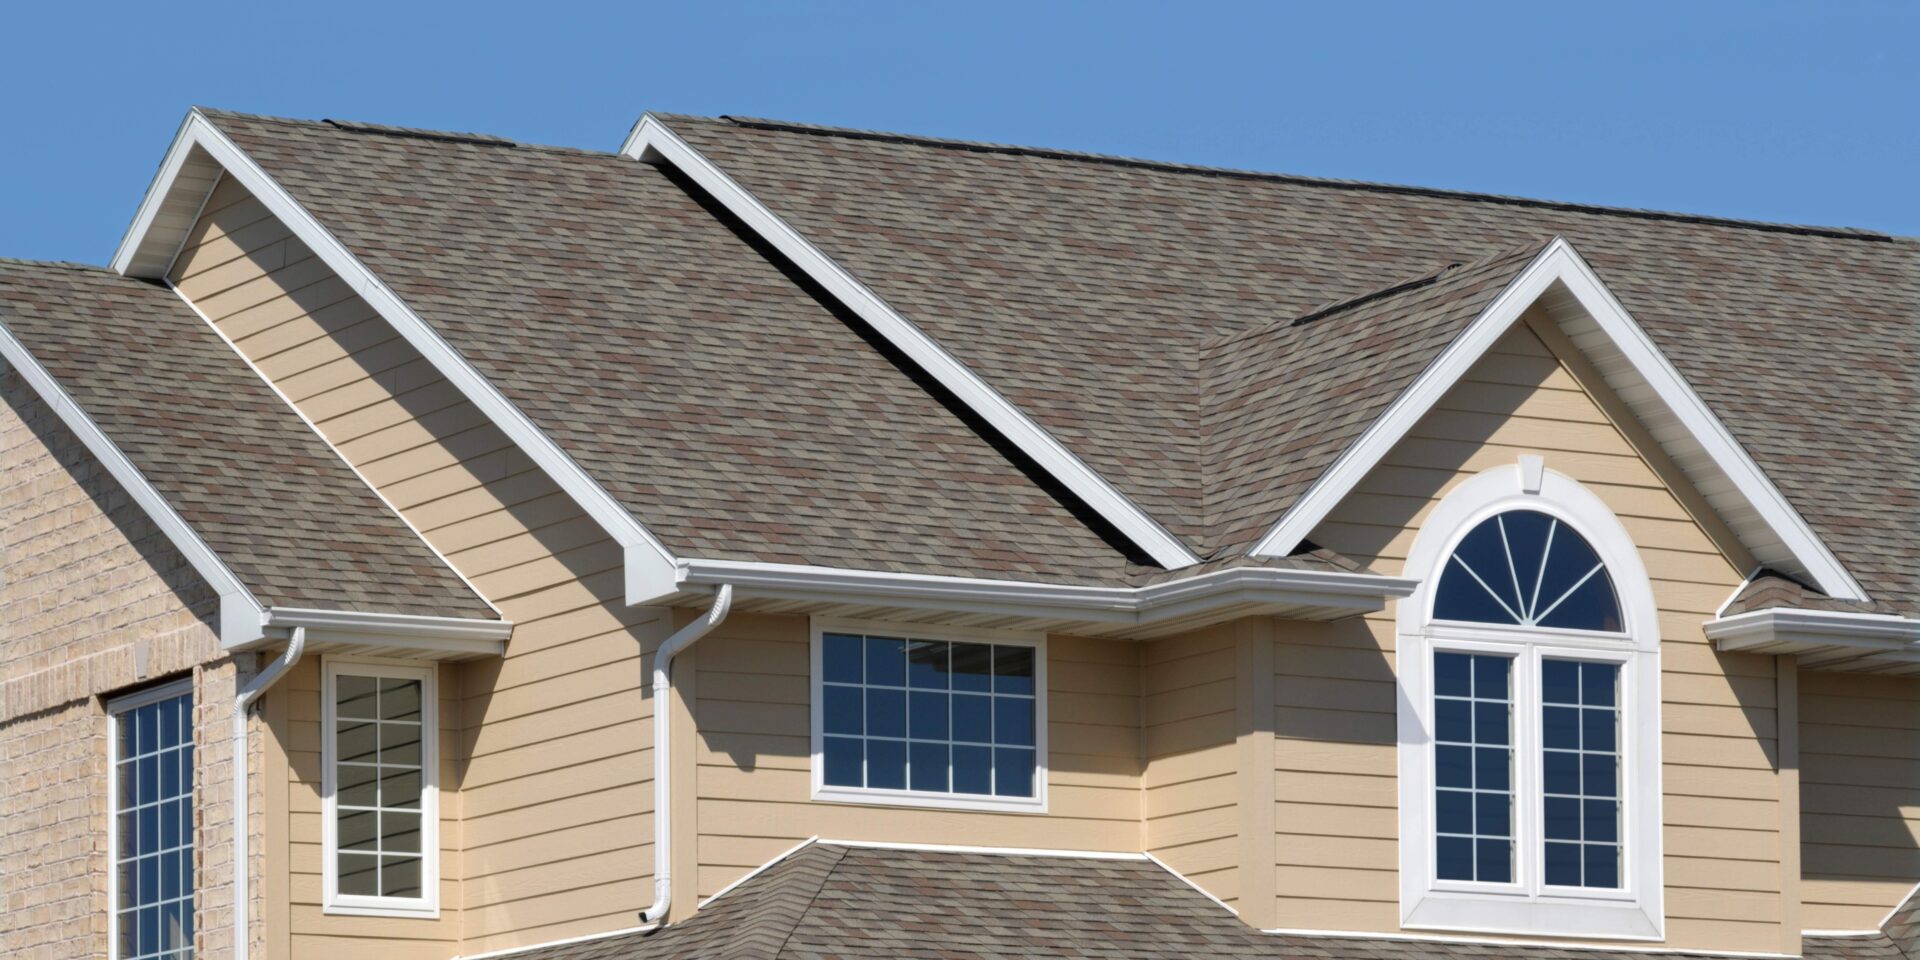 Top 8 Residential Roofing Systems